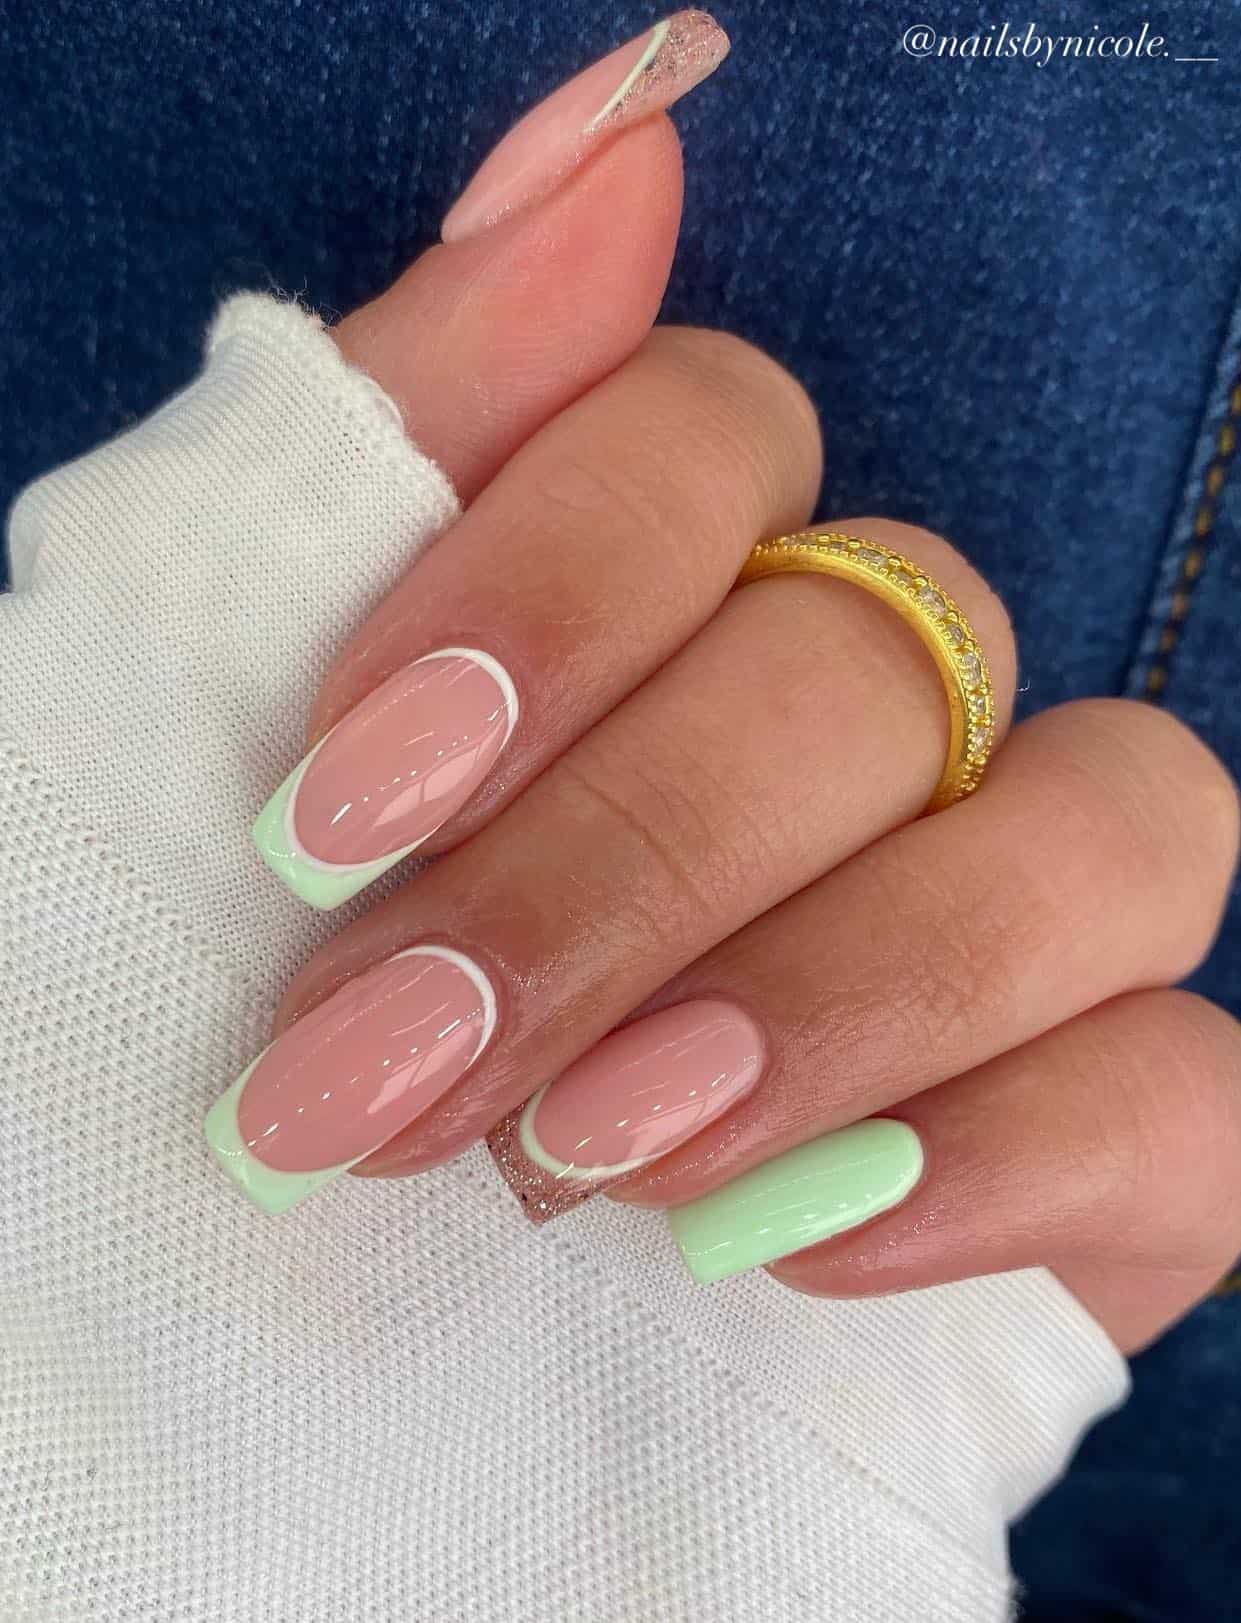 A hand with medium square nails painted a glossy nude with mint green French tips, glitter French tips, white reverse French tips, and a solid mint green accent nail